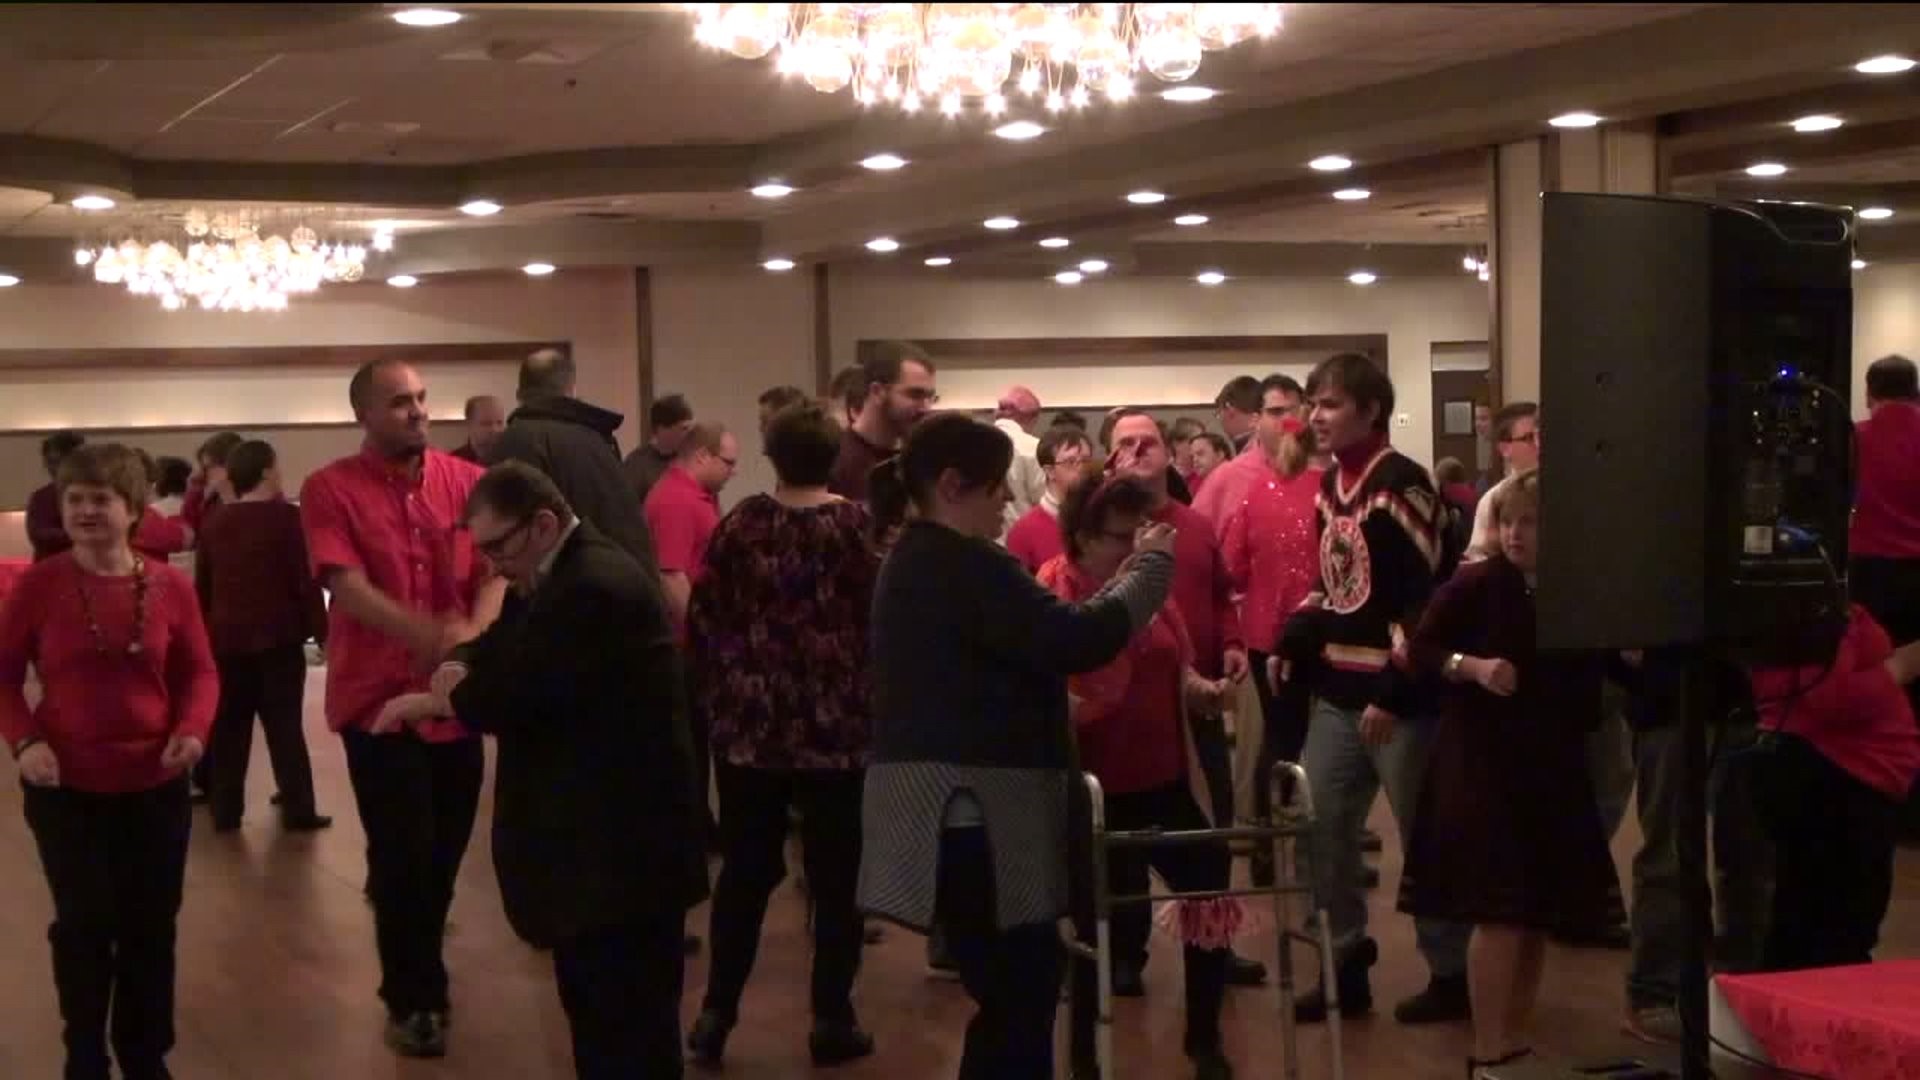 Valentine's Dinner and Dance for People with Special Needs